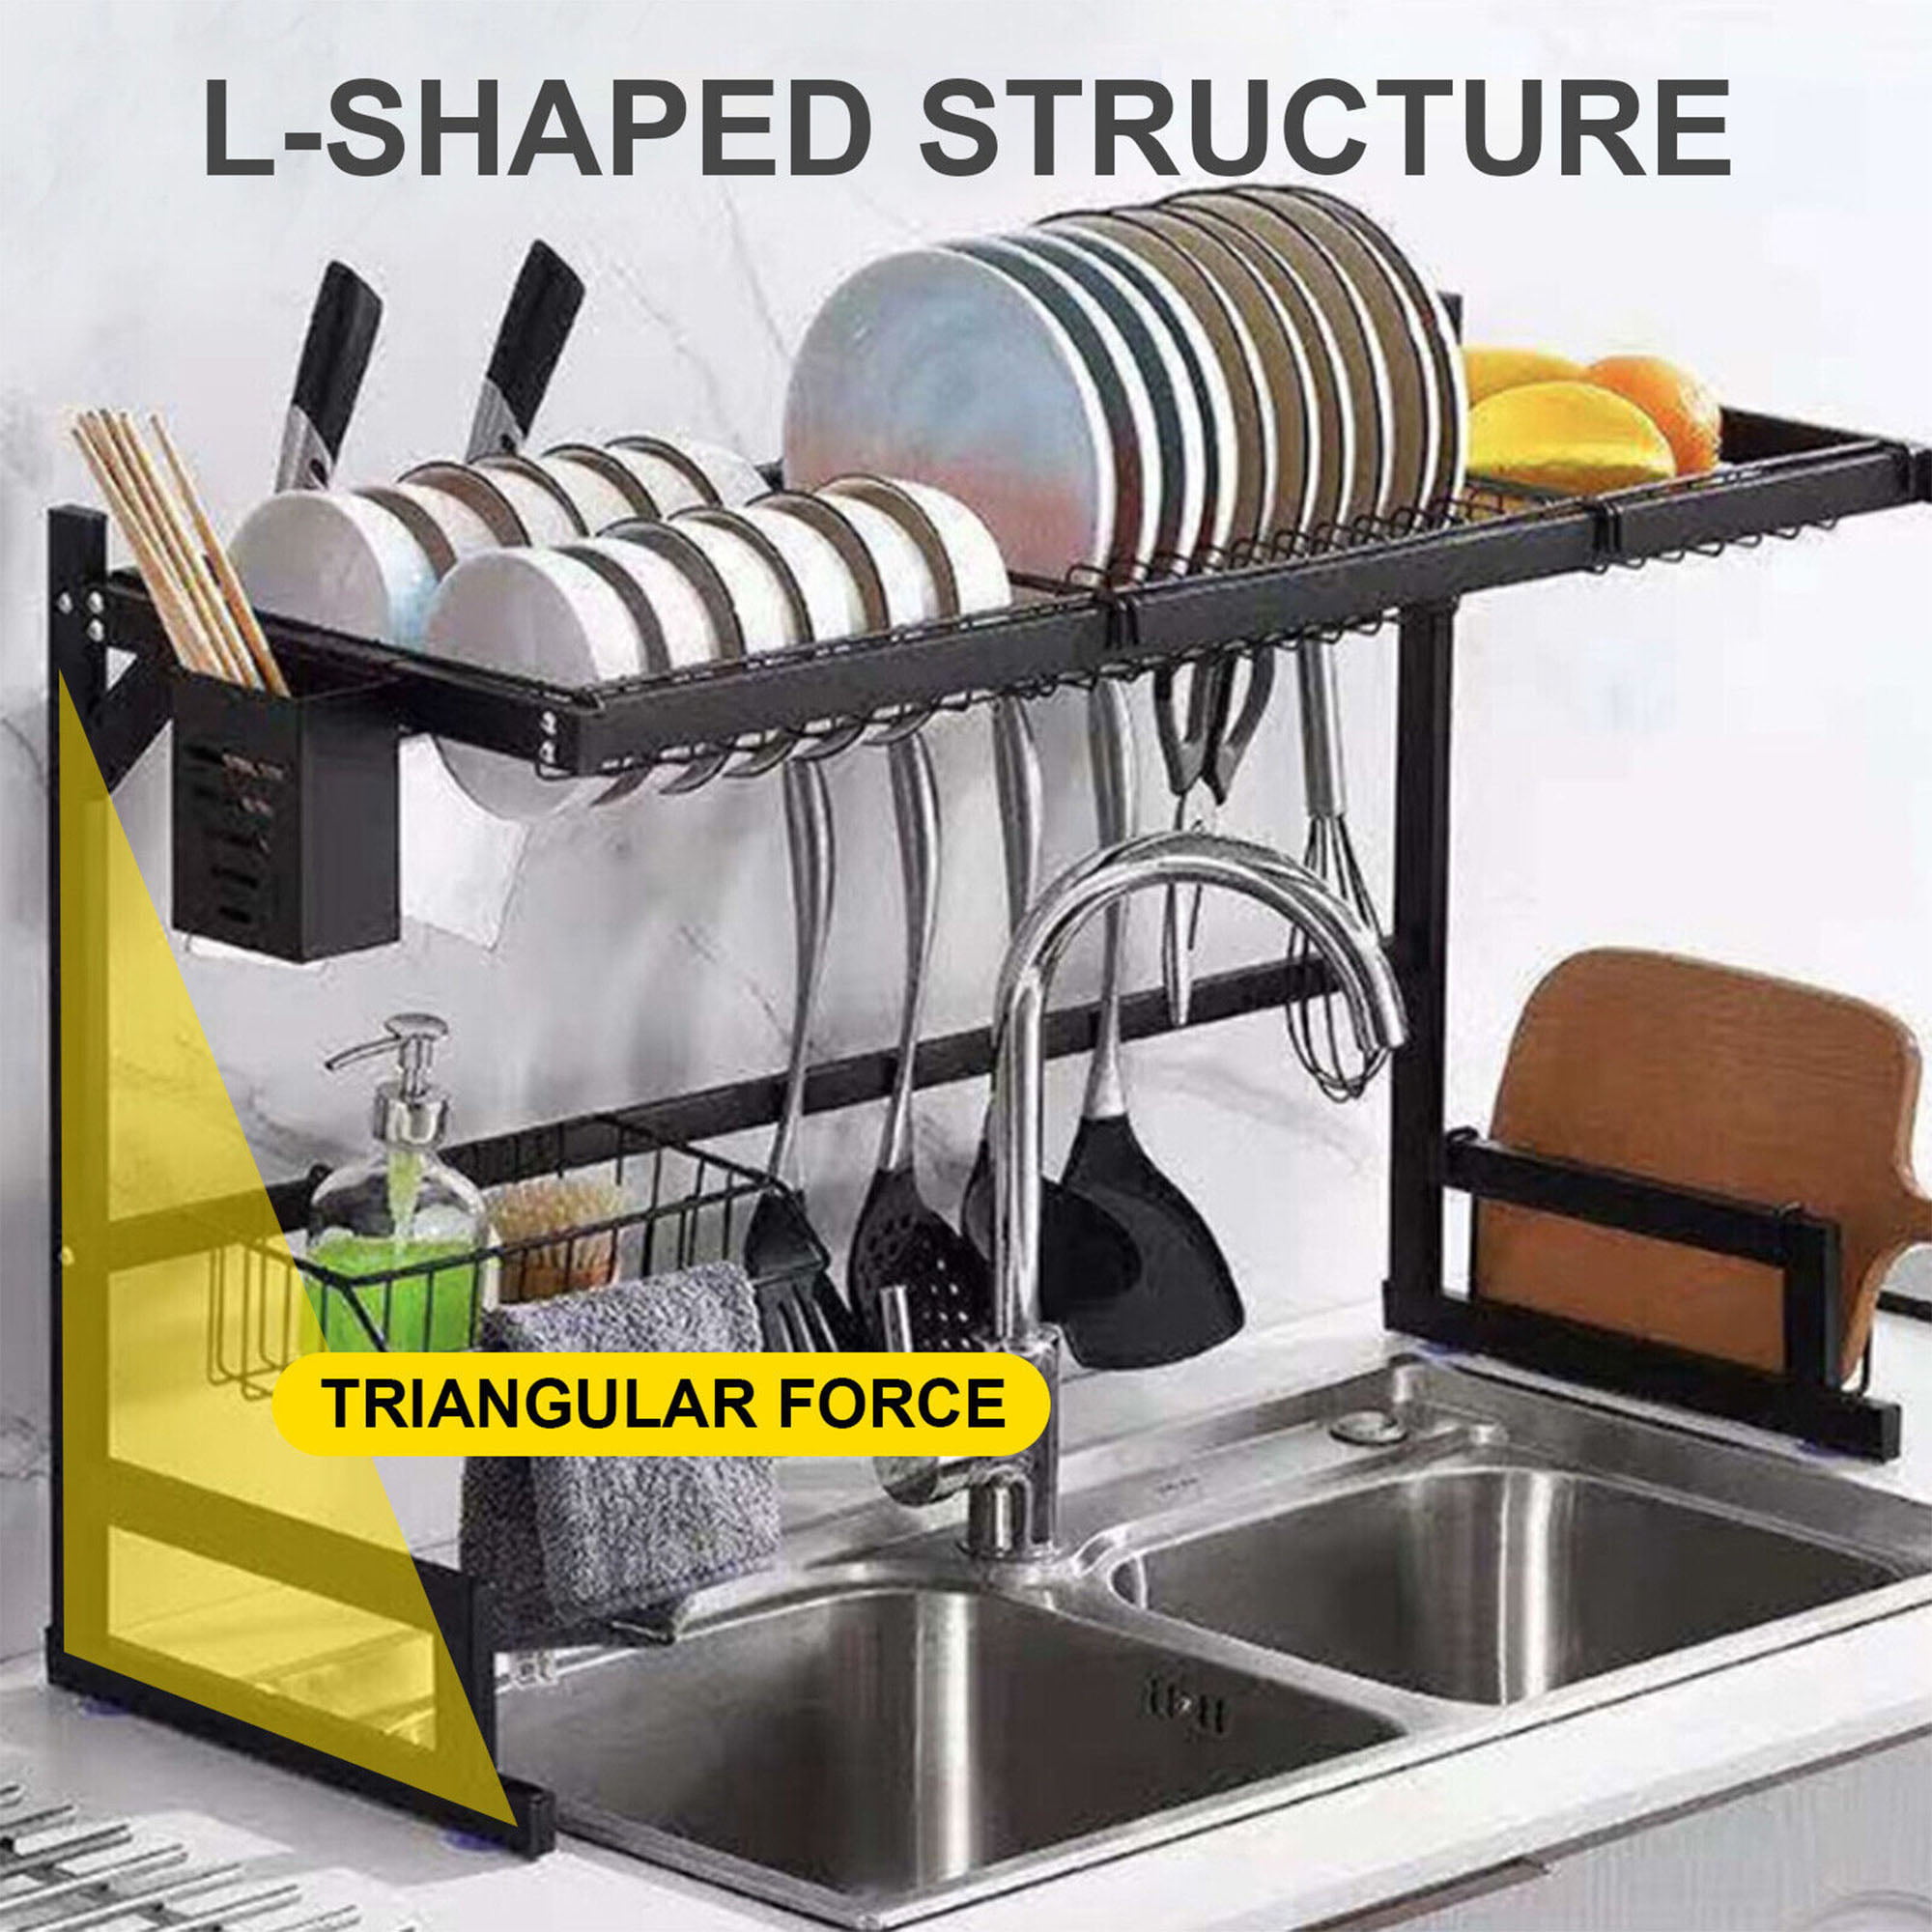 UIFER Dish Drying Rack for Kitchen Counter Sink Organization and Storage,  Dish Rack with Drainboard and Utensil Holder Easy to Drain and Clean